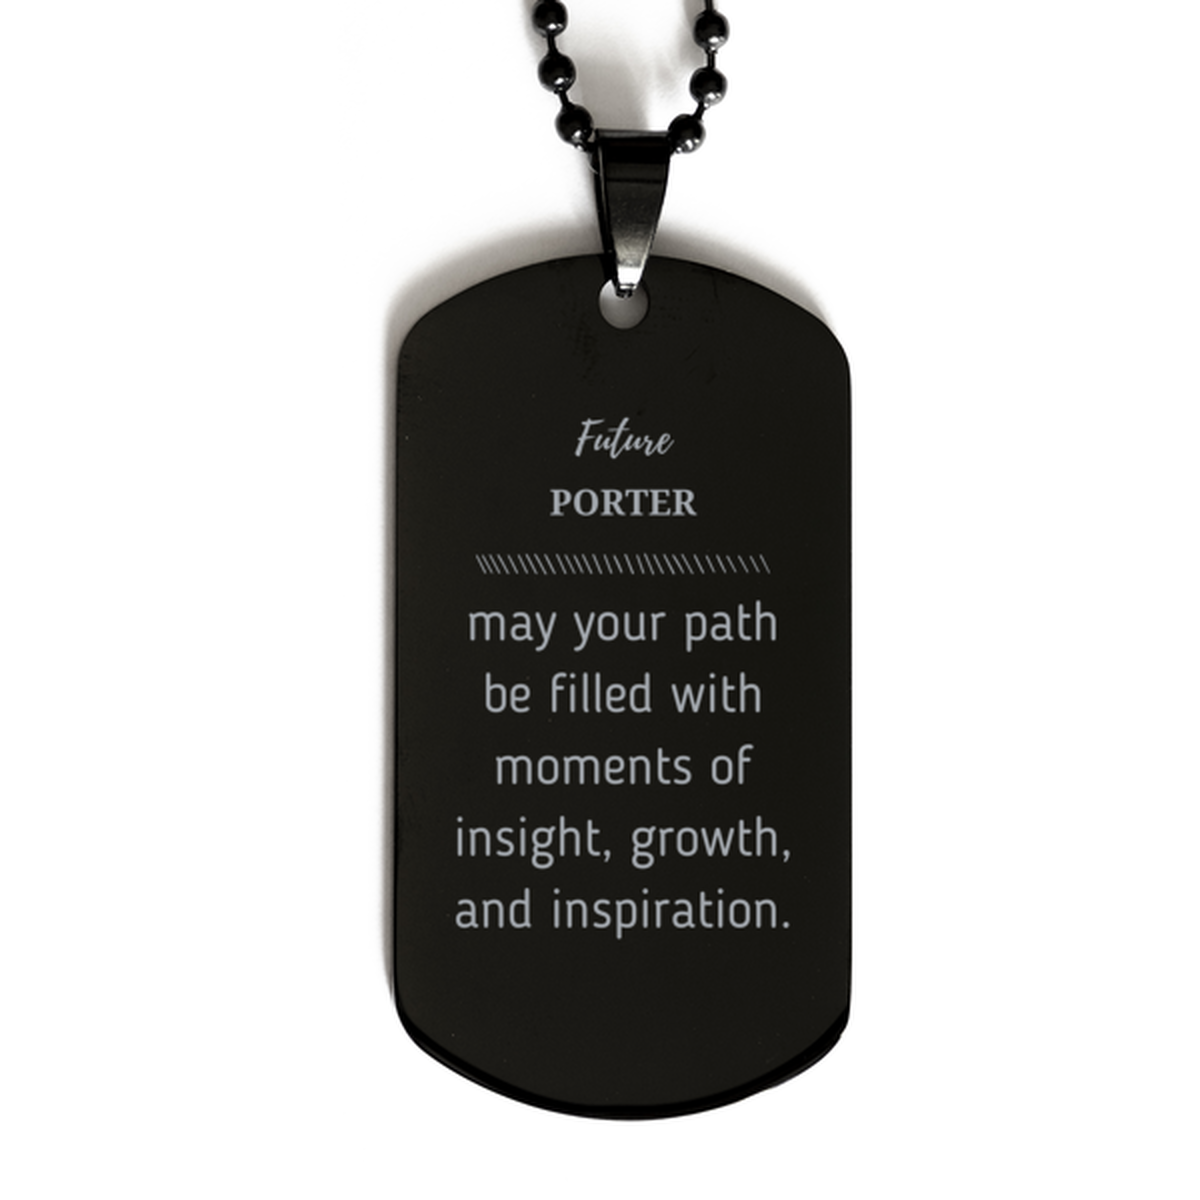 Future Porter Gifts, May your path be filled with moments of insight, Graduation Gifts for New Porter, Christmas Unique Black Dog Tag For Men, Women, Friends